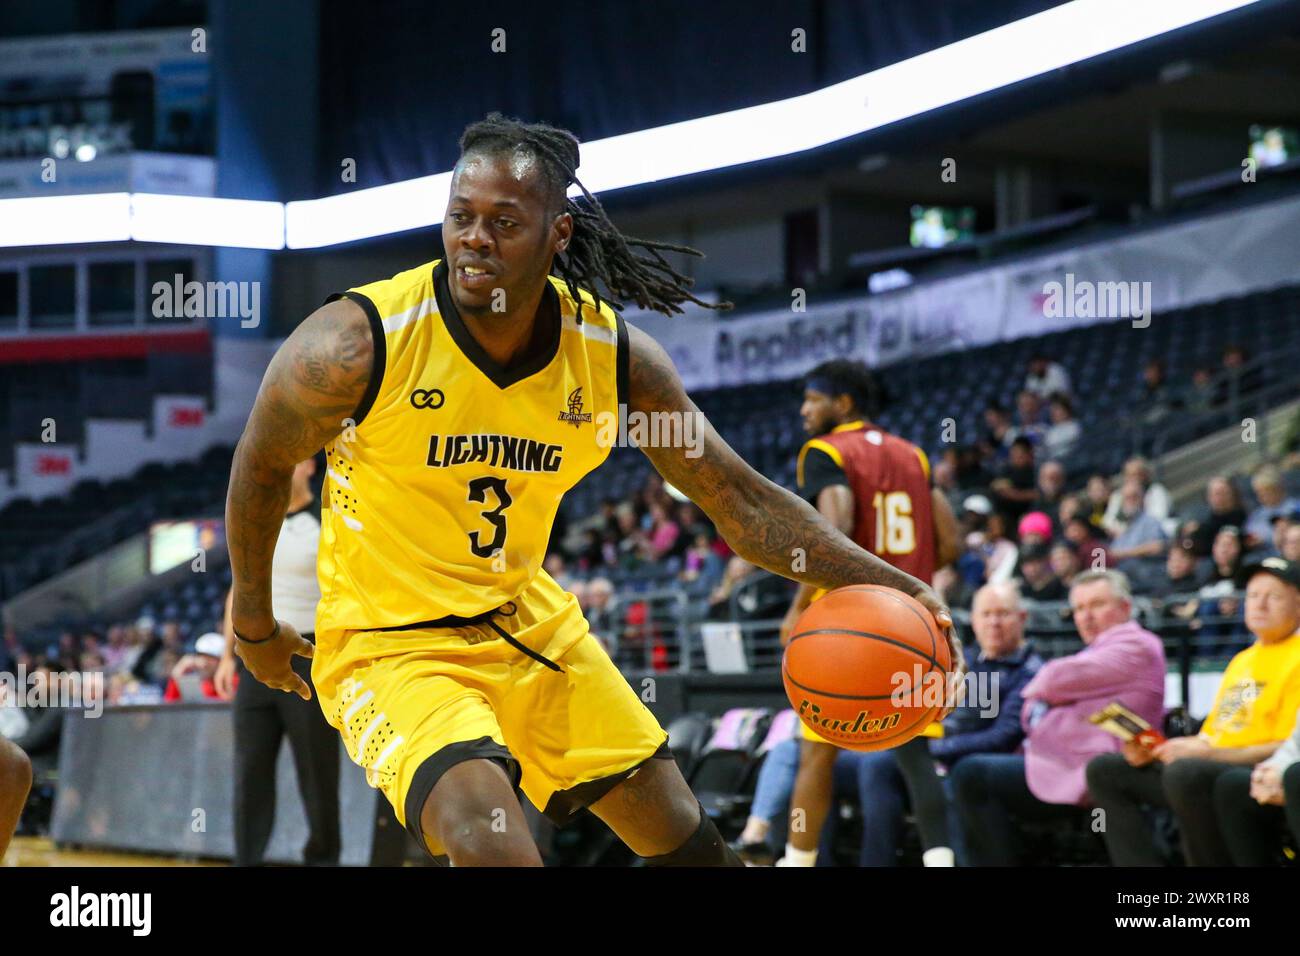 London, Canada. 1st Apr, 2024. The London Lightning lead the Newfoundland Rogues 60-56 at half time. Devon Baulkman (3) of the London Lightning during his first game as a lightning. Credit: Luke Durda/Alamy Live News Stock Photo